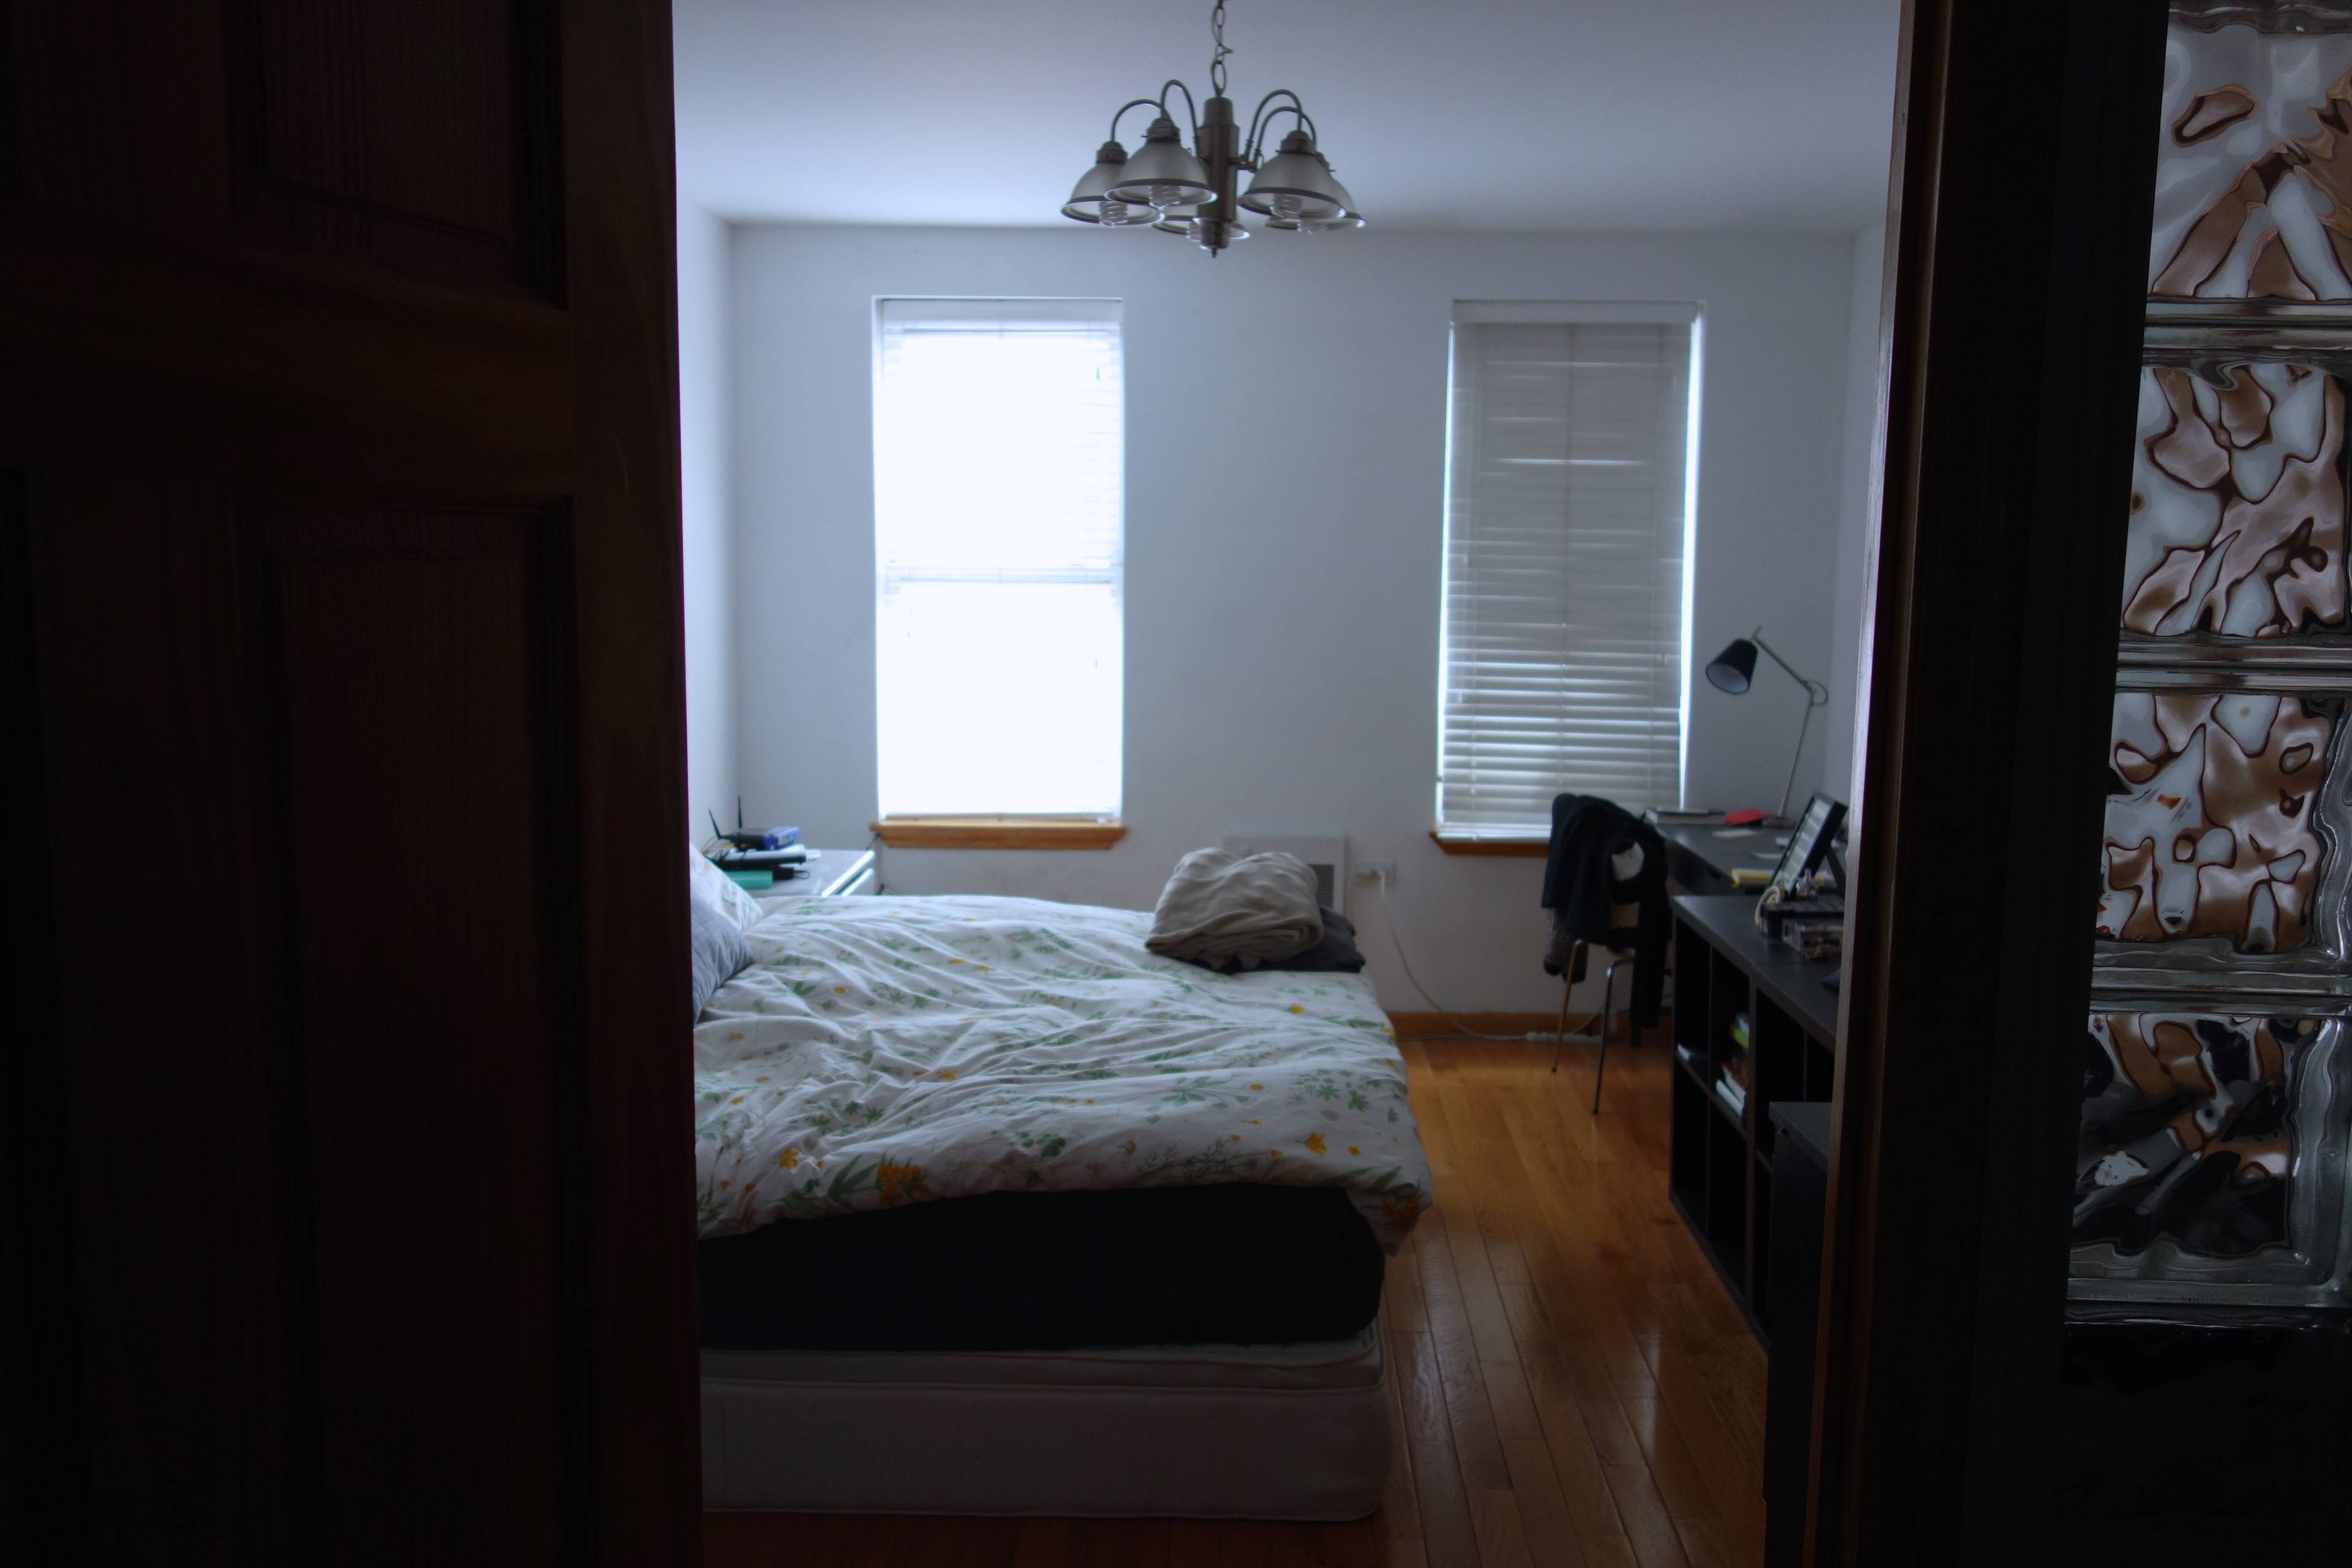 HEART OF WILLIAMSBURG- 2 BEDROOM, newly renovated, only steps away from the Bedford L train